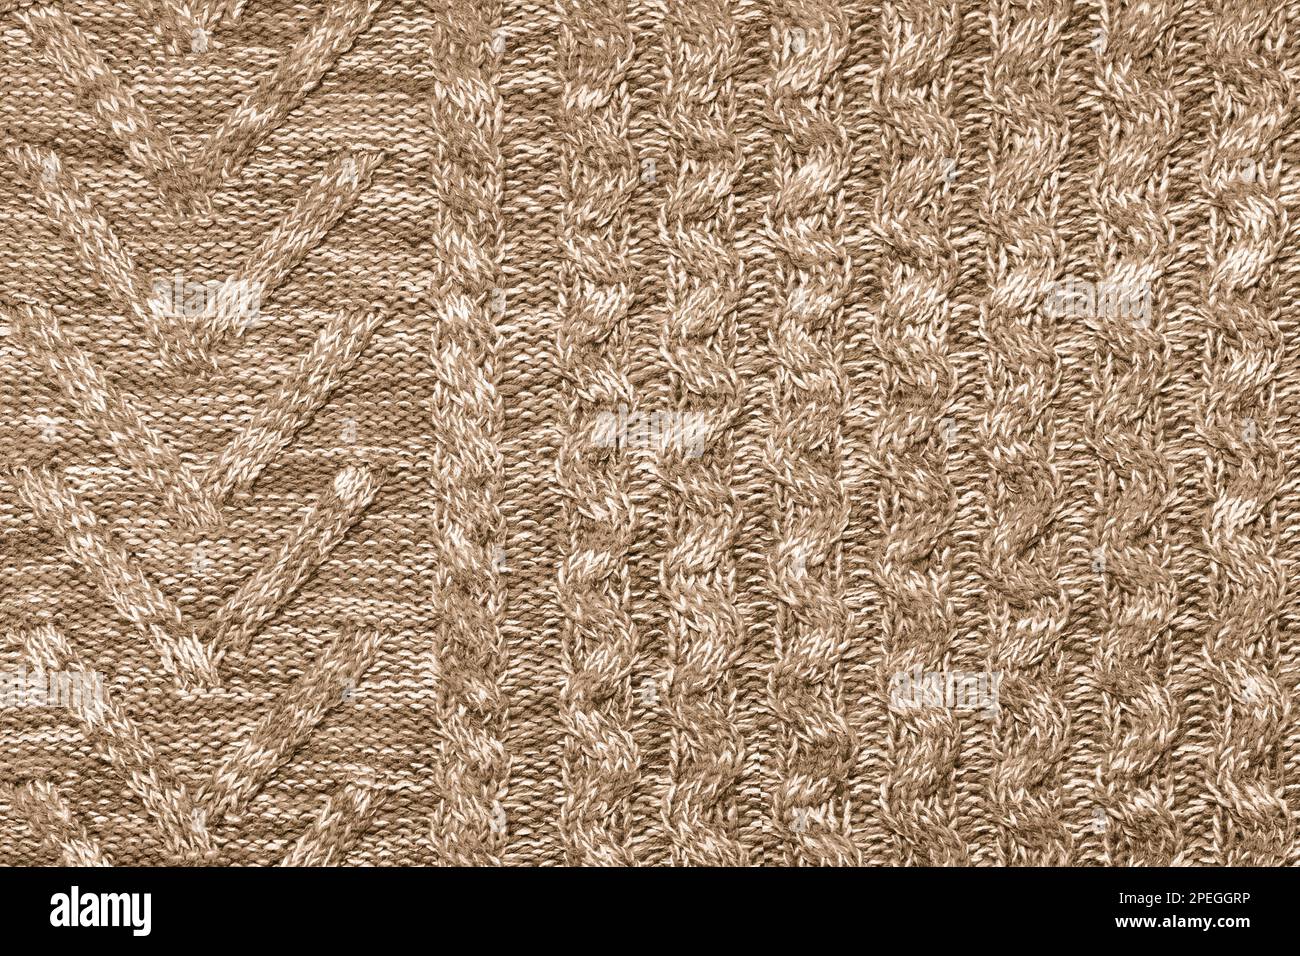 brown knitted fabric with large knitting needles Stock Photo